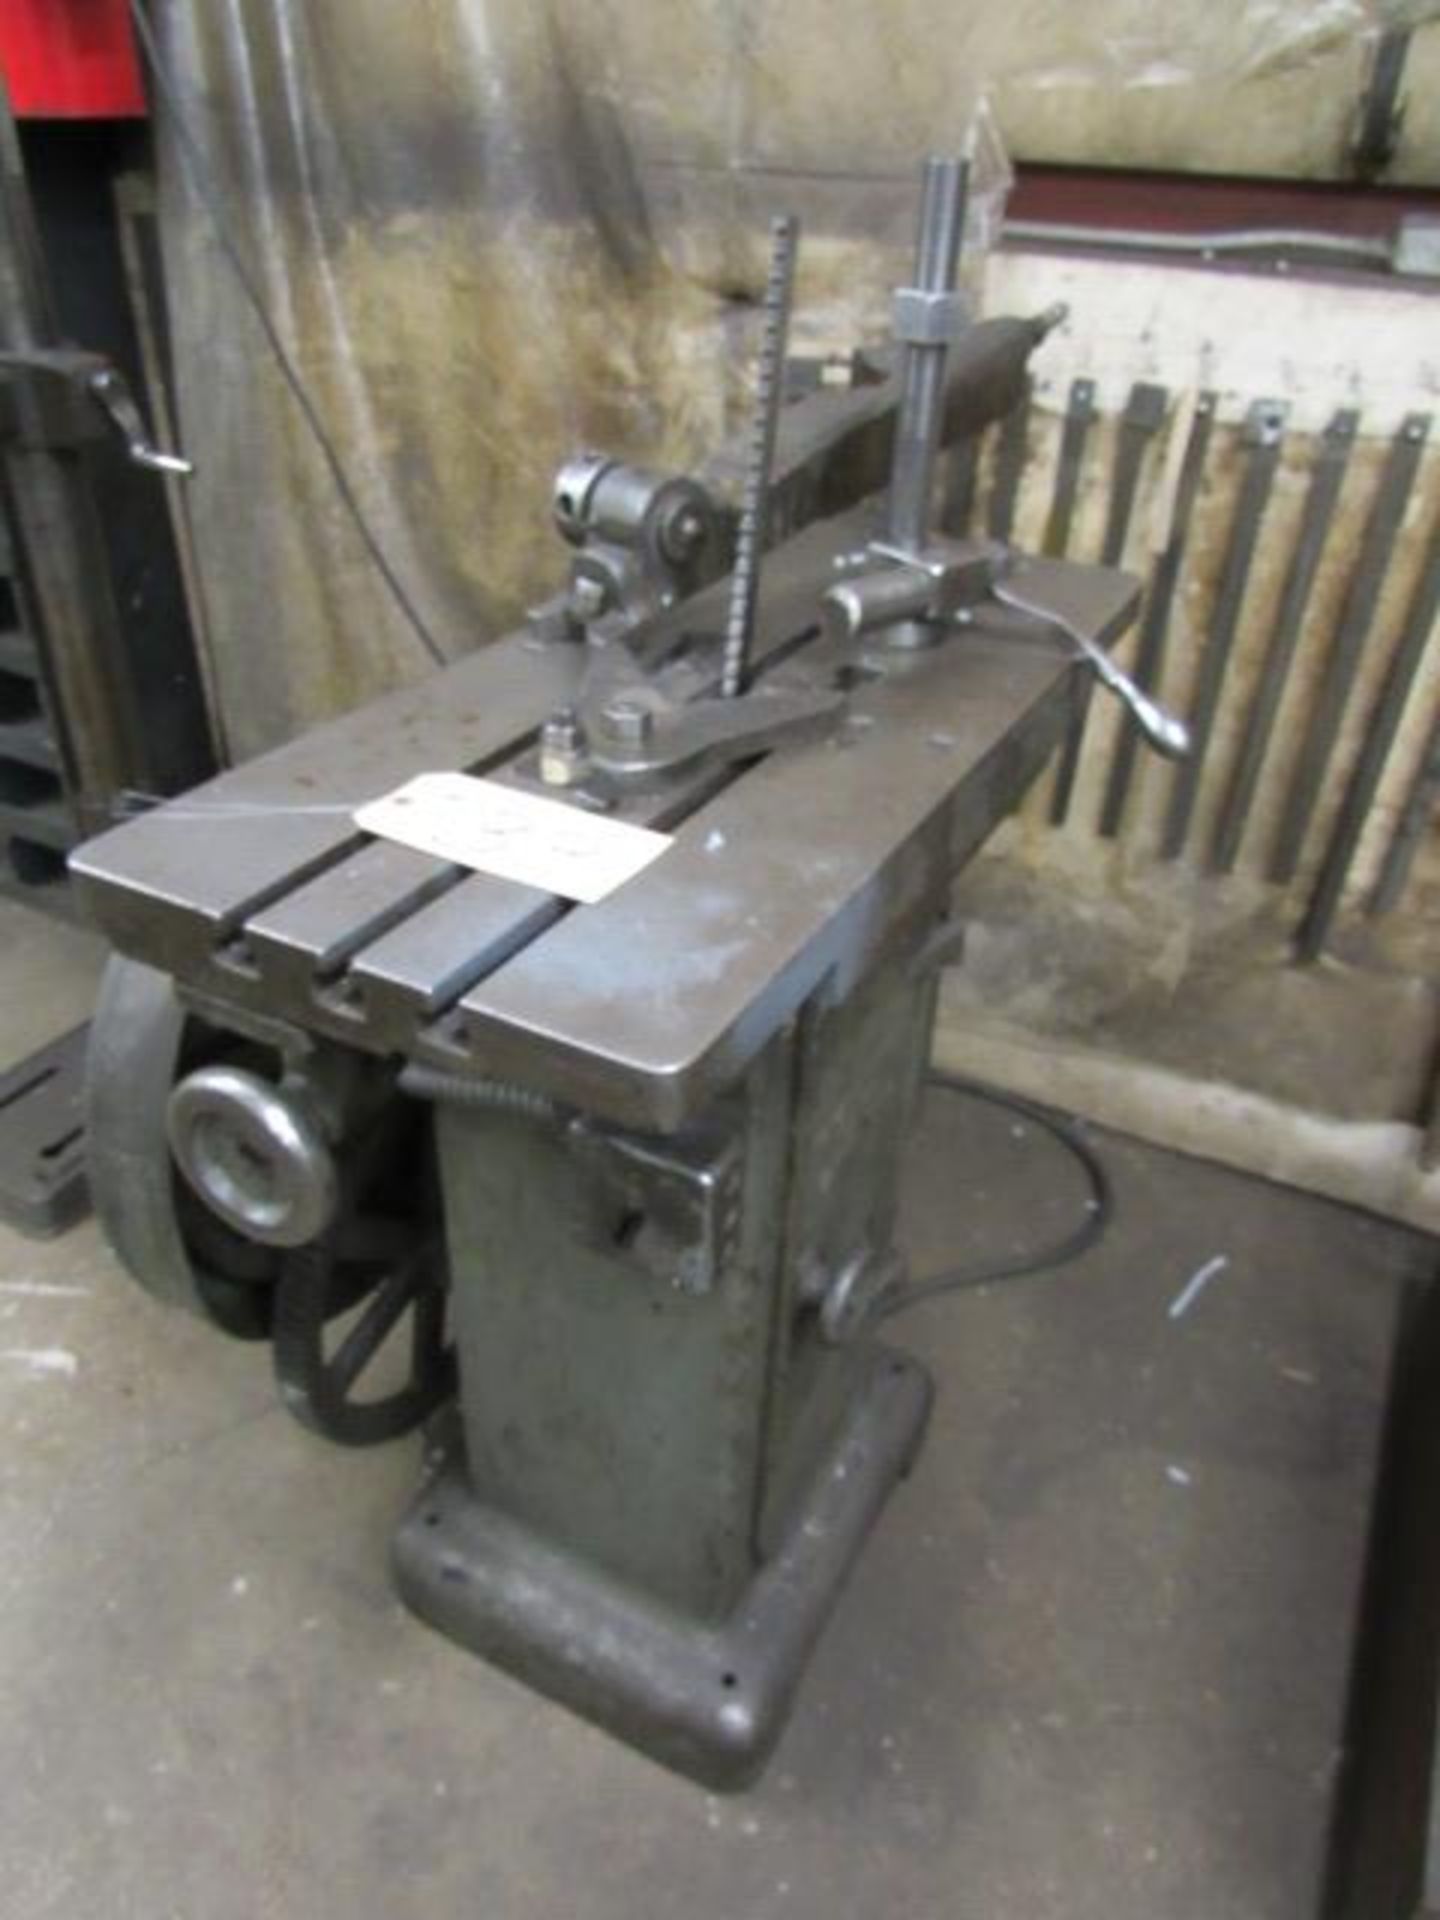 McIlvane Keyseater with T-Slotted Table, Tooling